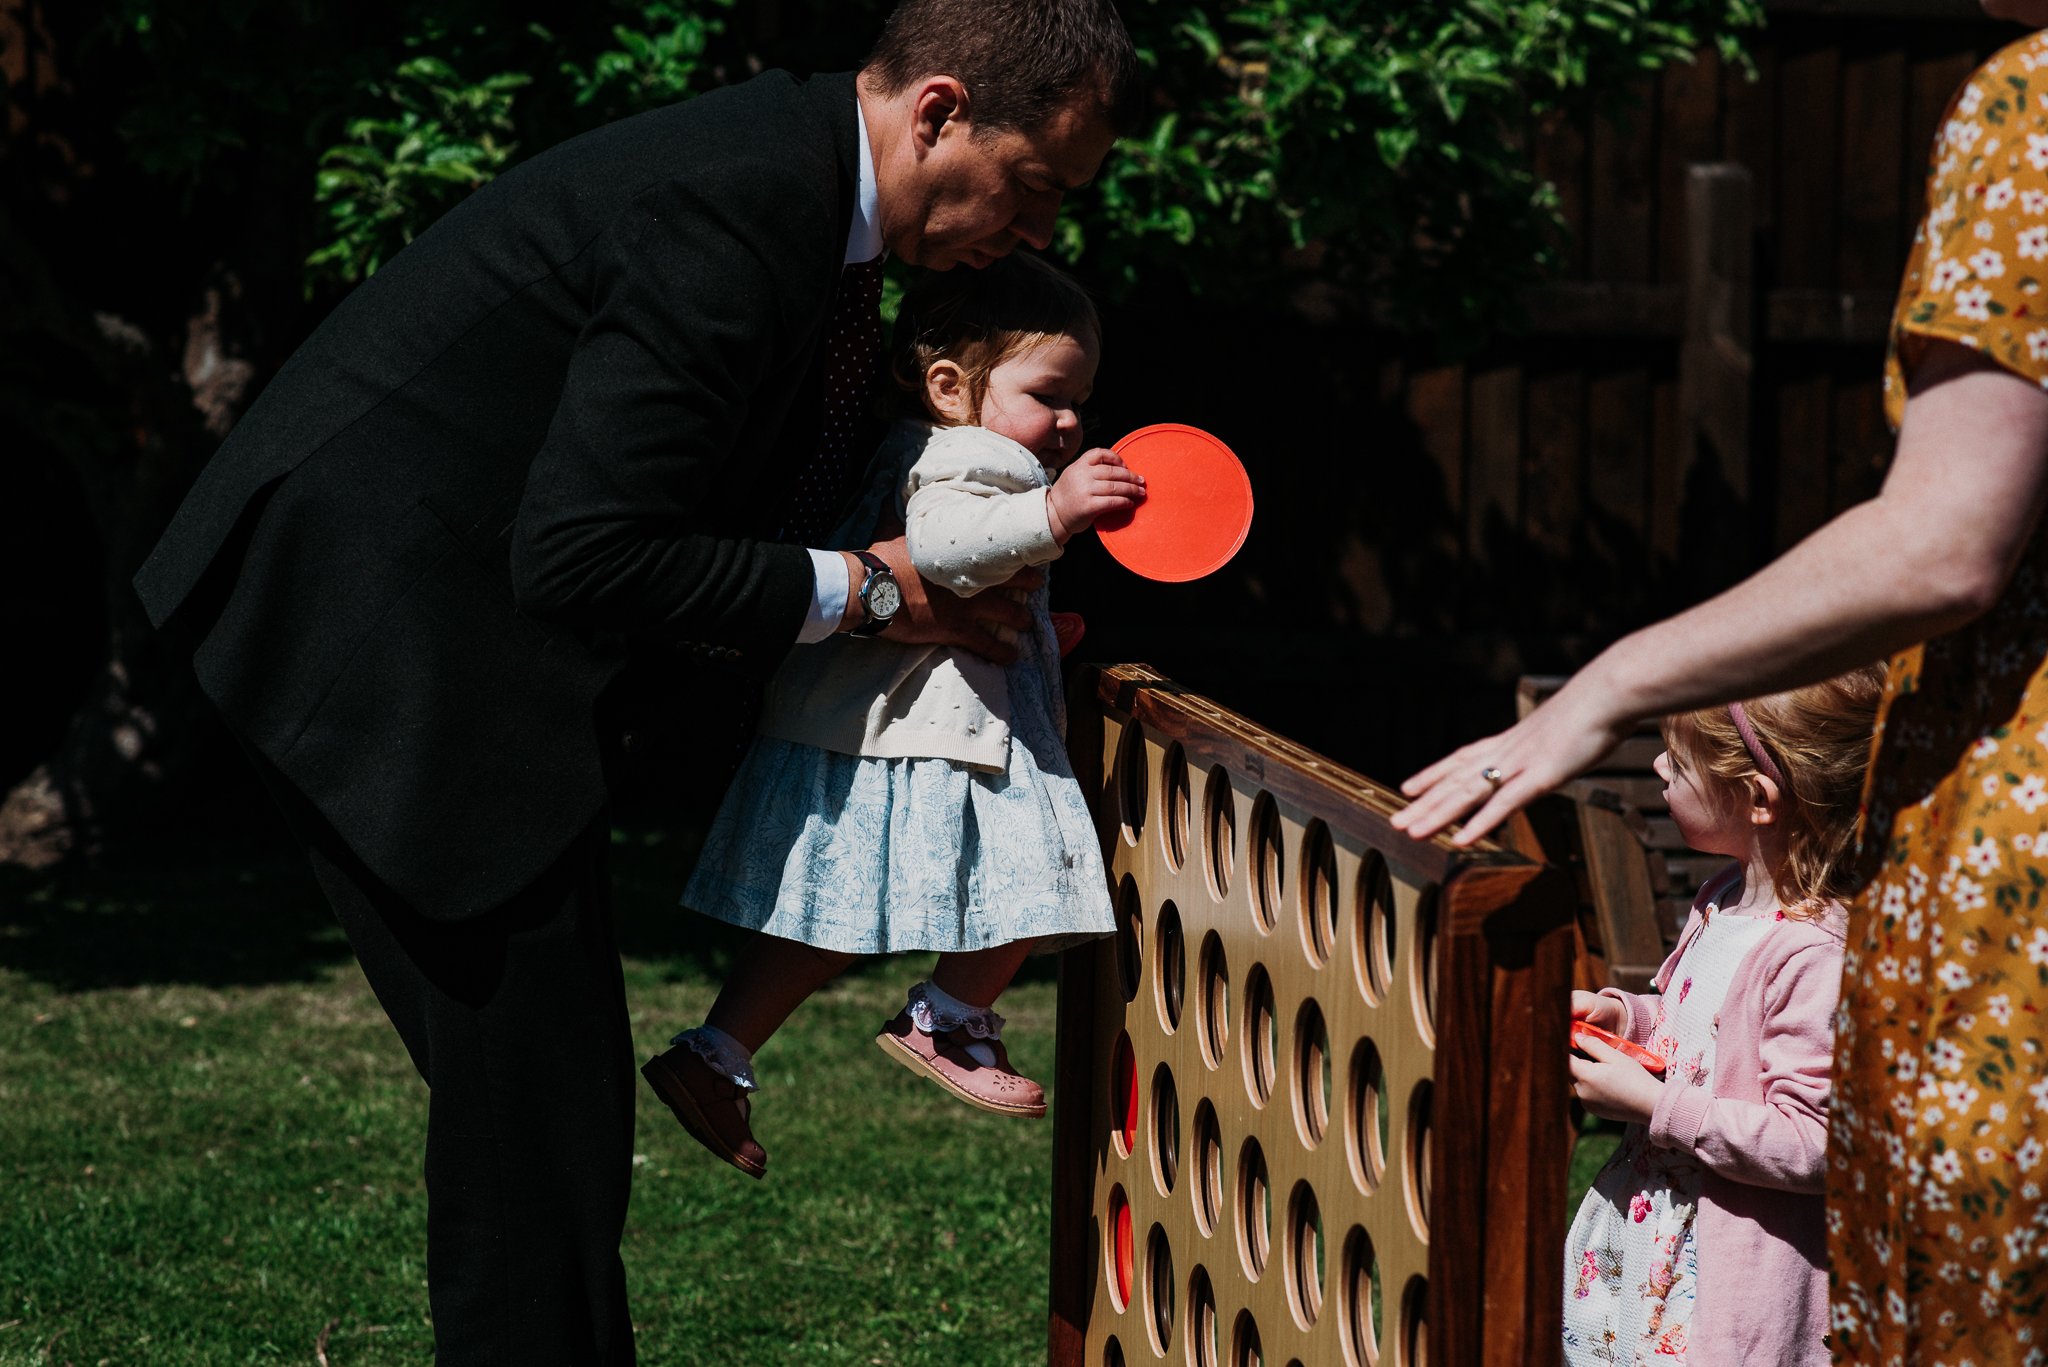 A wedding guest helps a young guest to win at giant Connect 4 during the lawn games after the wedding ceremony at Sneaton Castle, North Yorkshire.